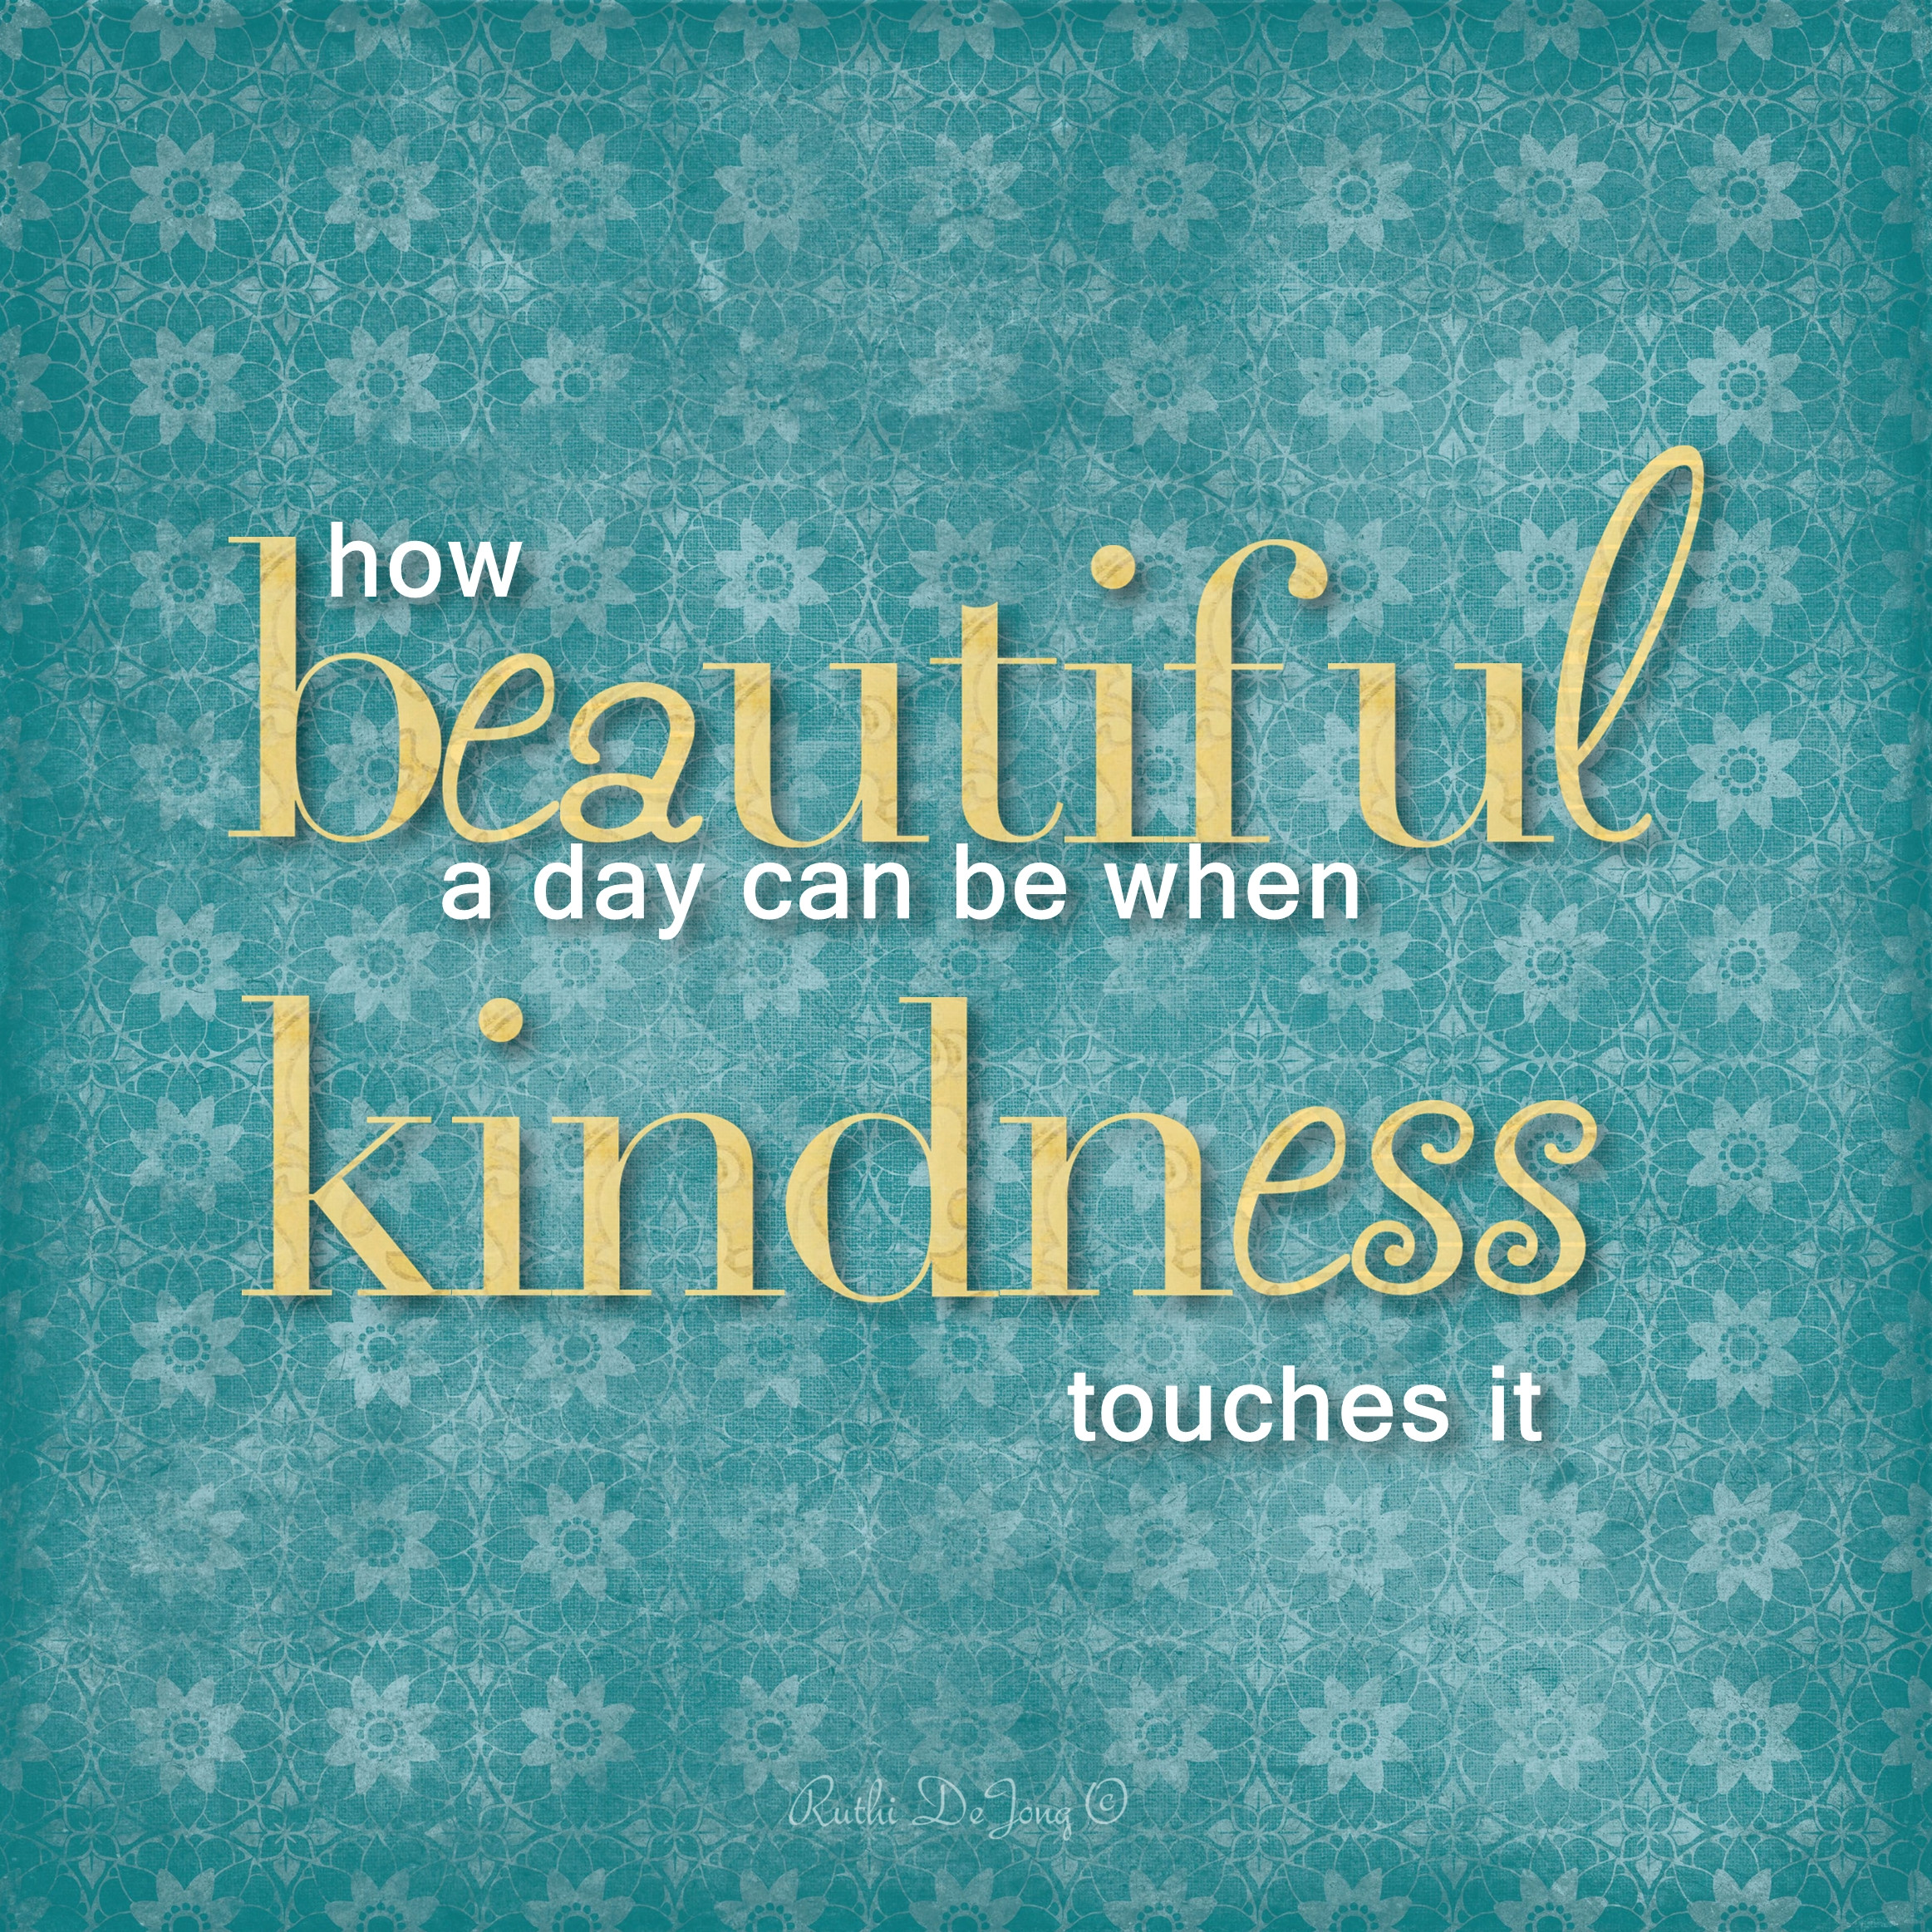 Kindness Matters Quotes
 a day of kindness